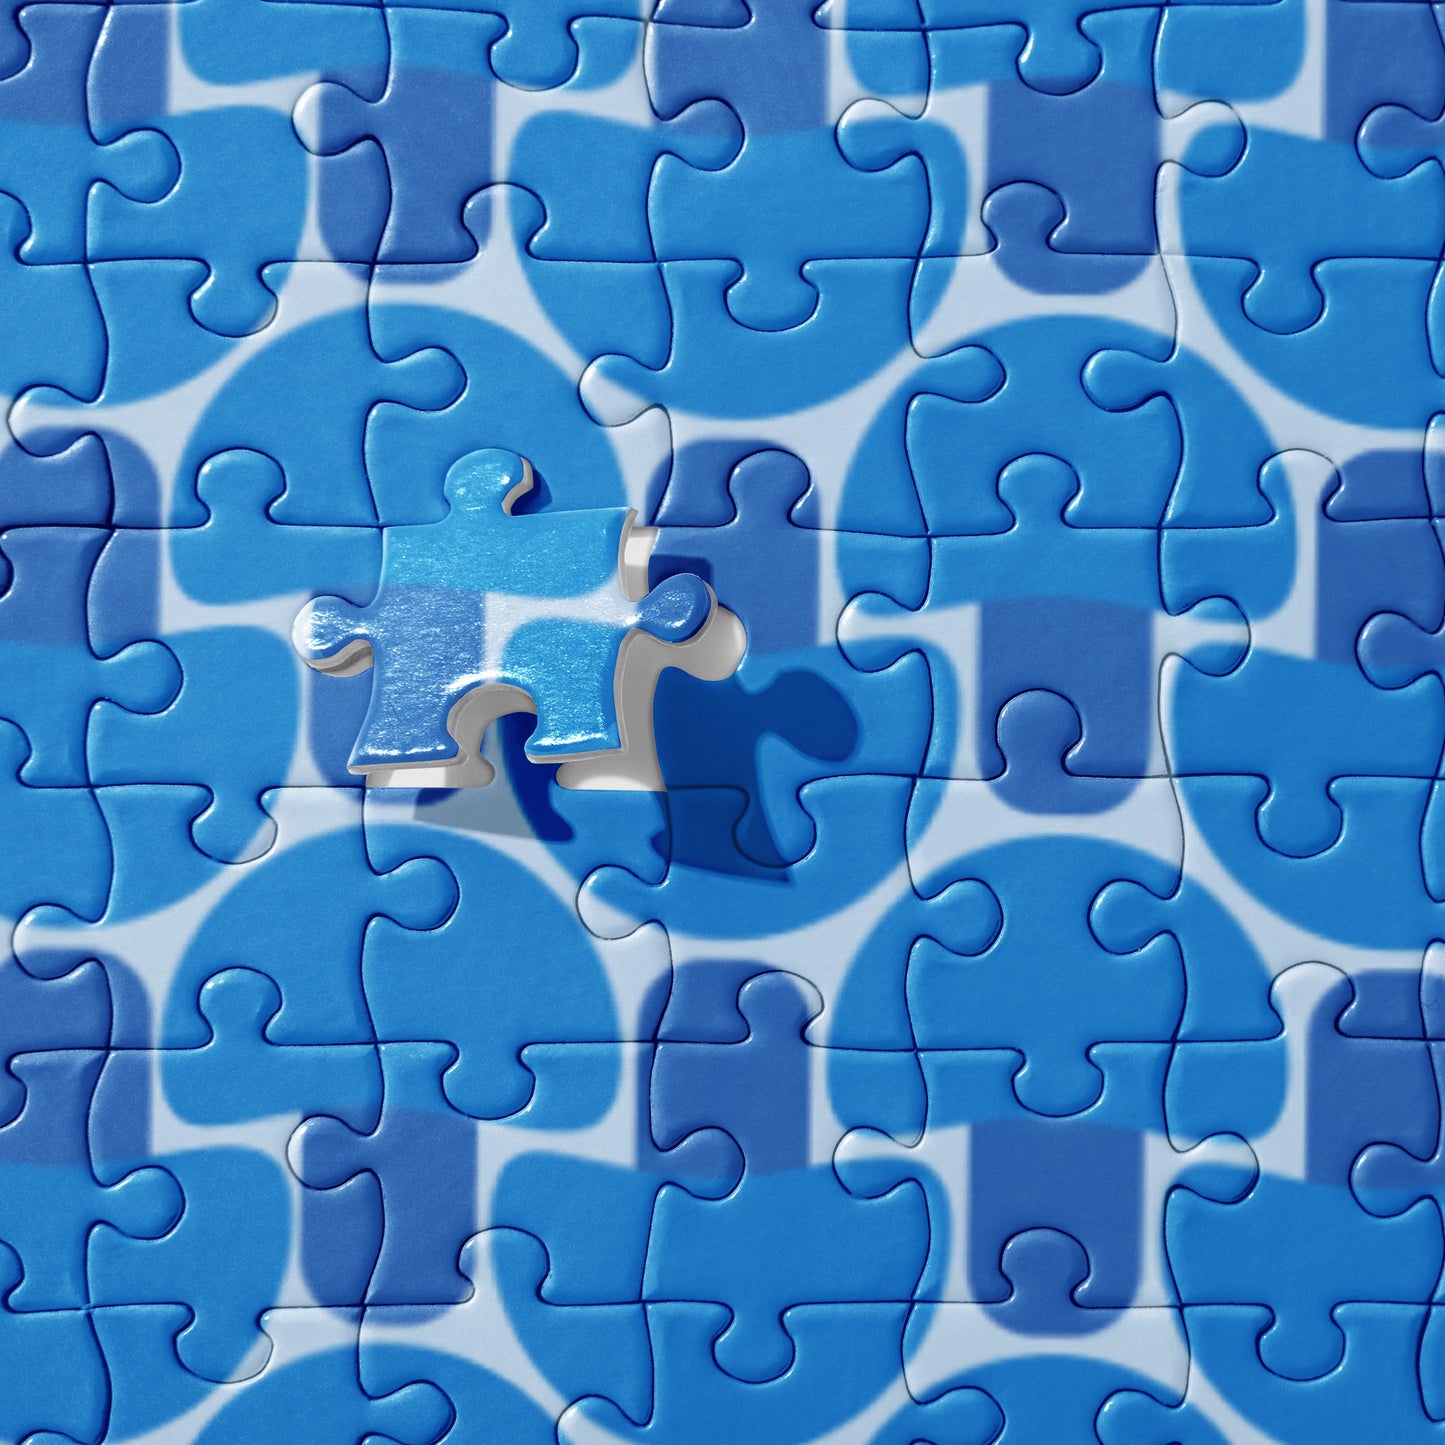 FUNGI JIGSAW PUZZLE in BLUE